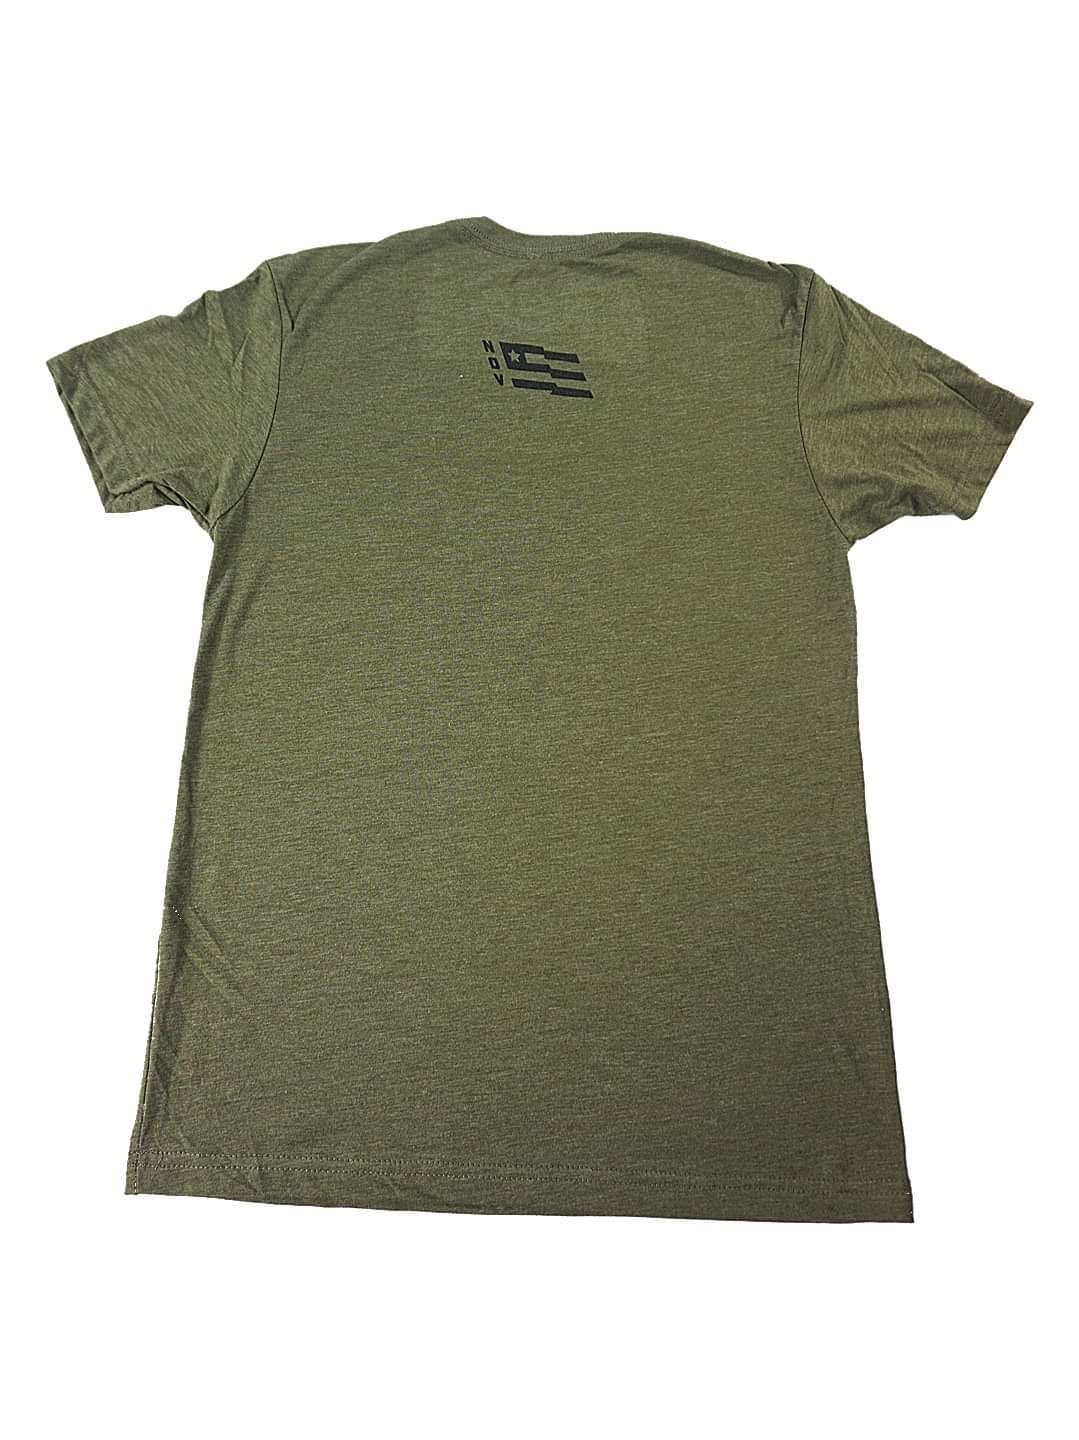 Limited Edition - Live Free Shirt - Army Green